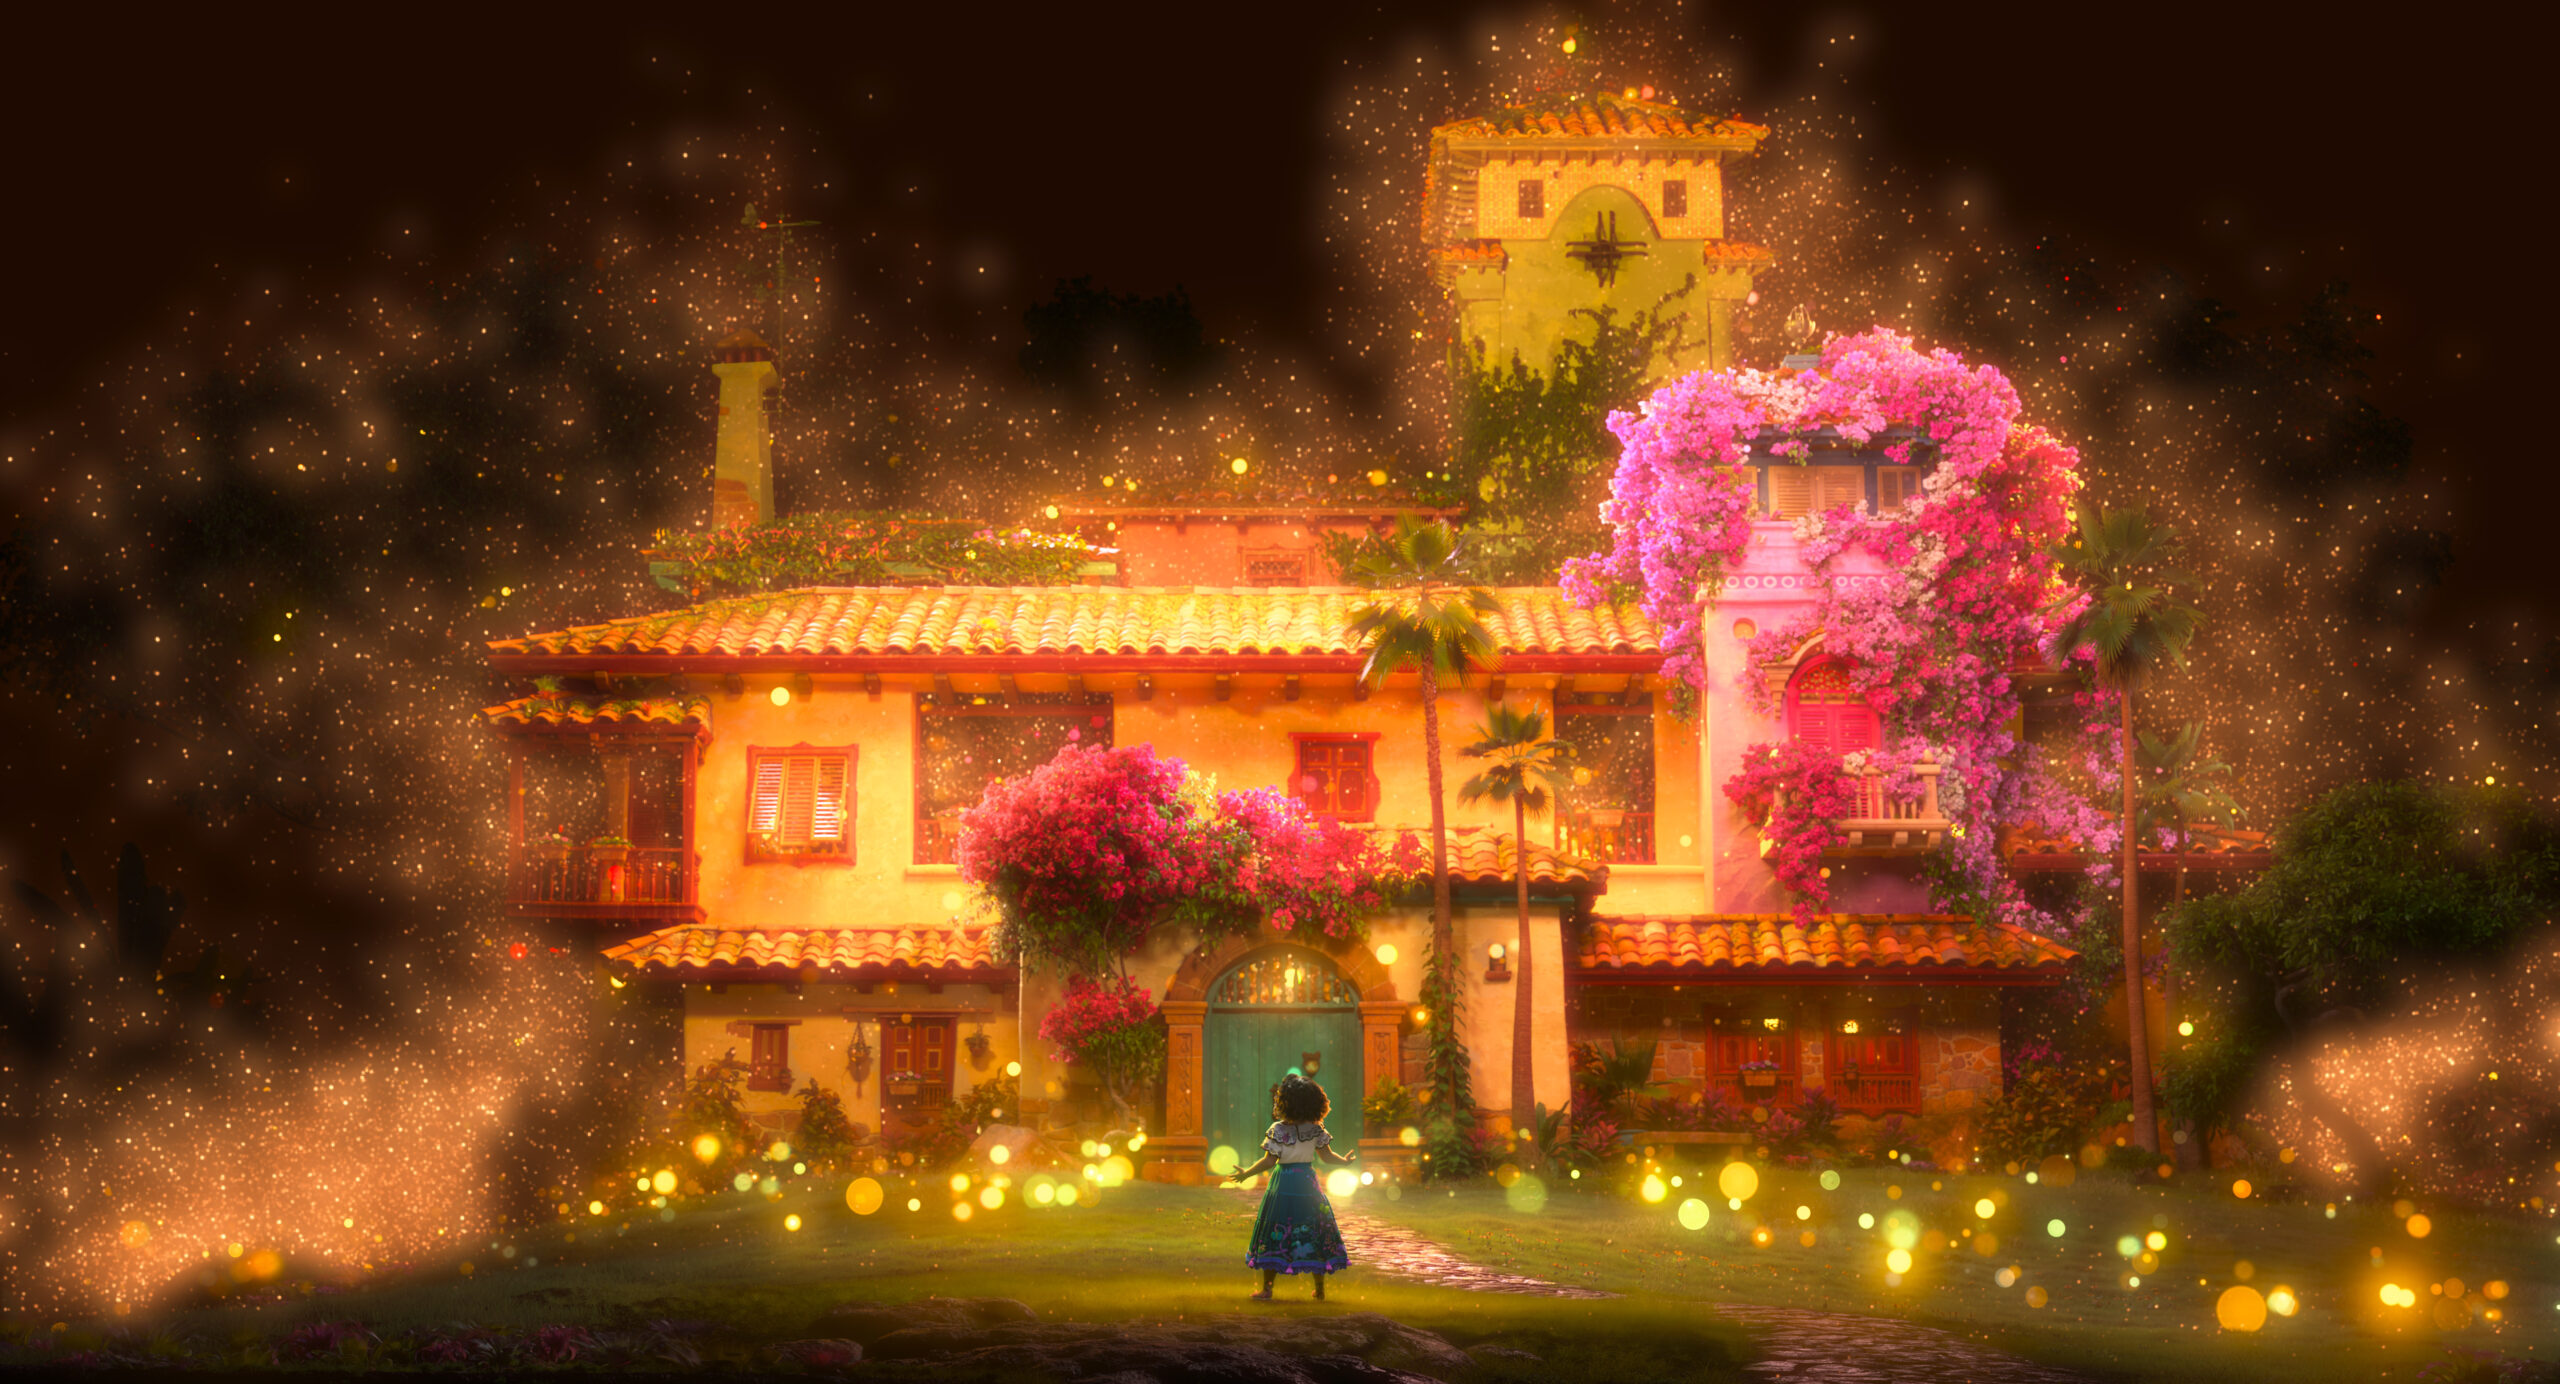 HOME SWEET HOME - The Madrigal’s casita in "Encanto" is more than...